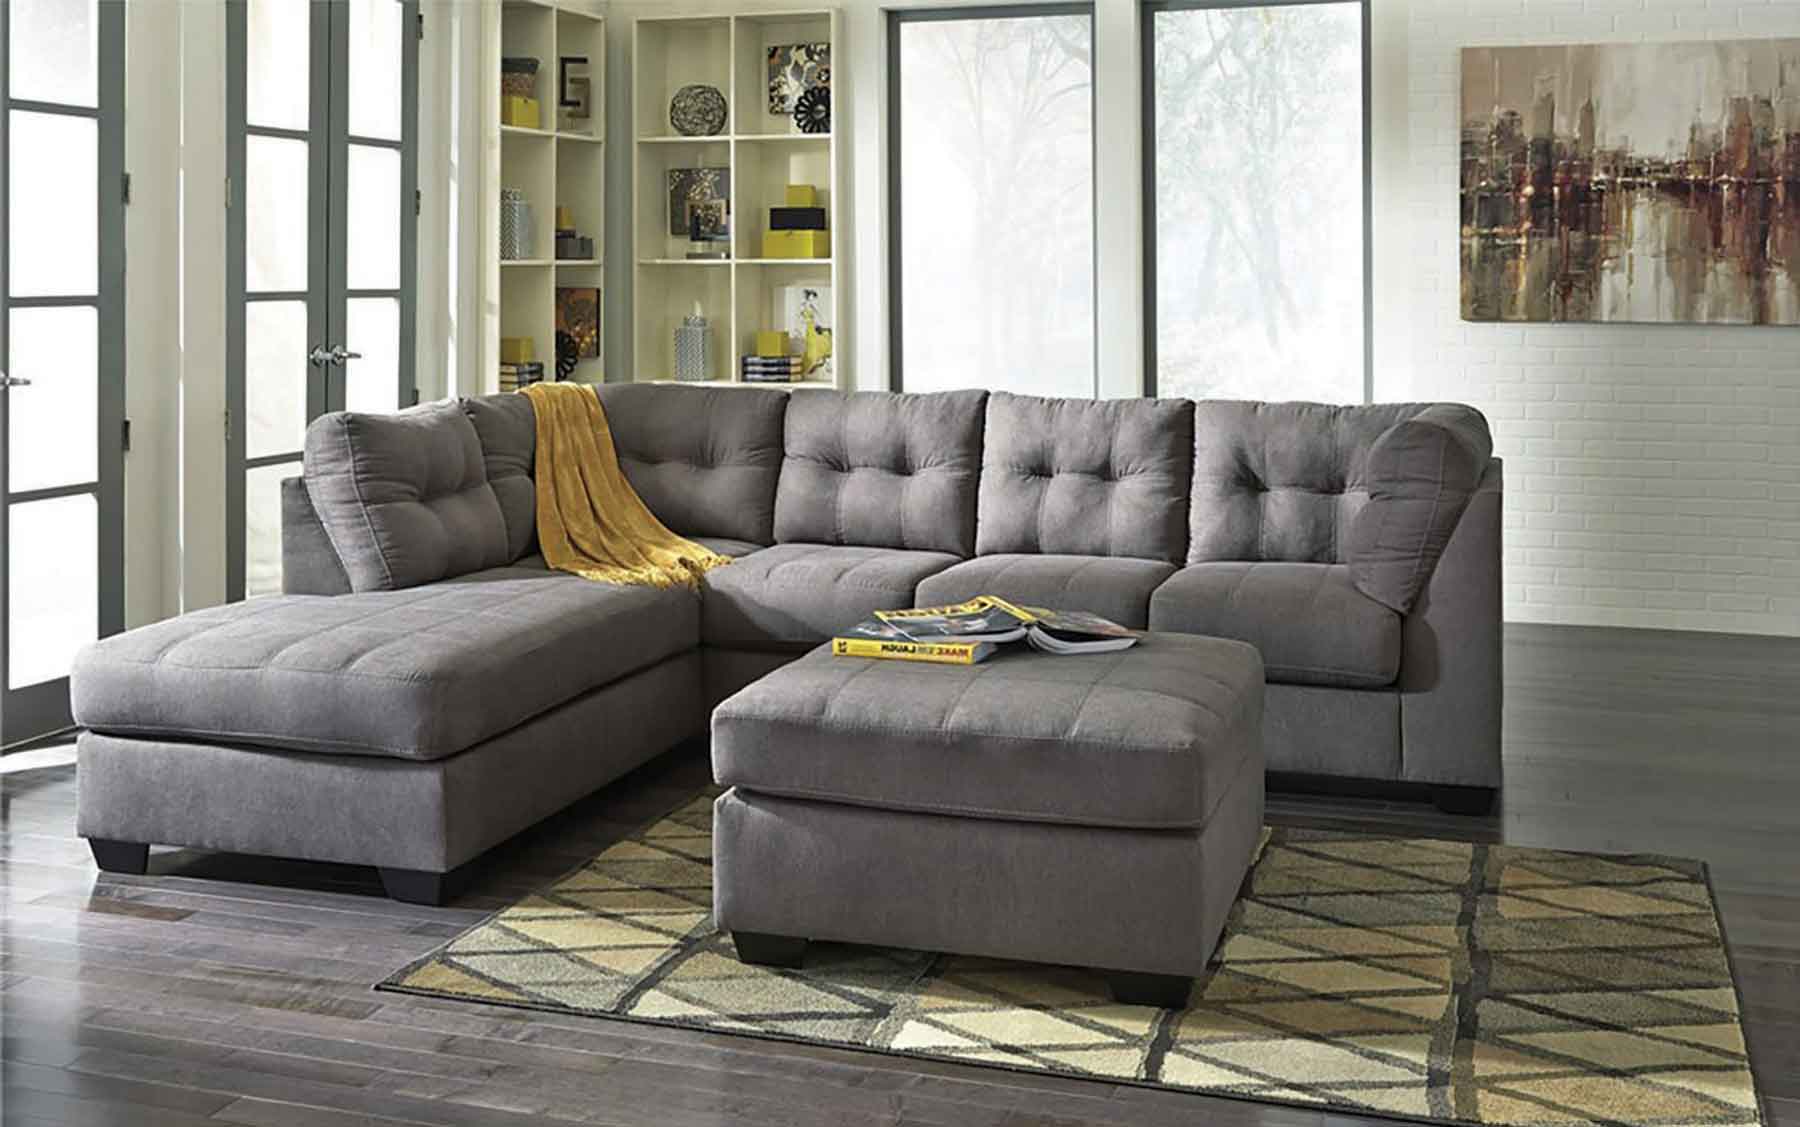 How To Maintain A Fabric Sofa